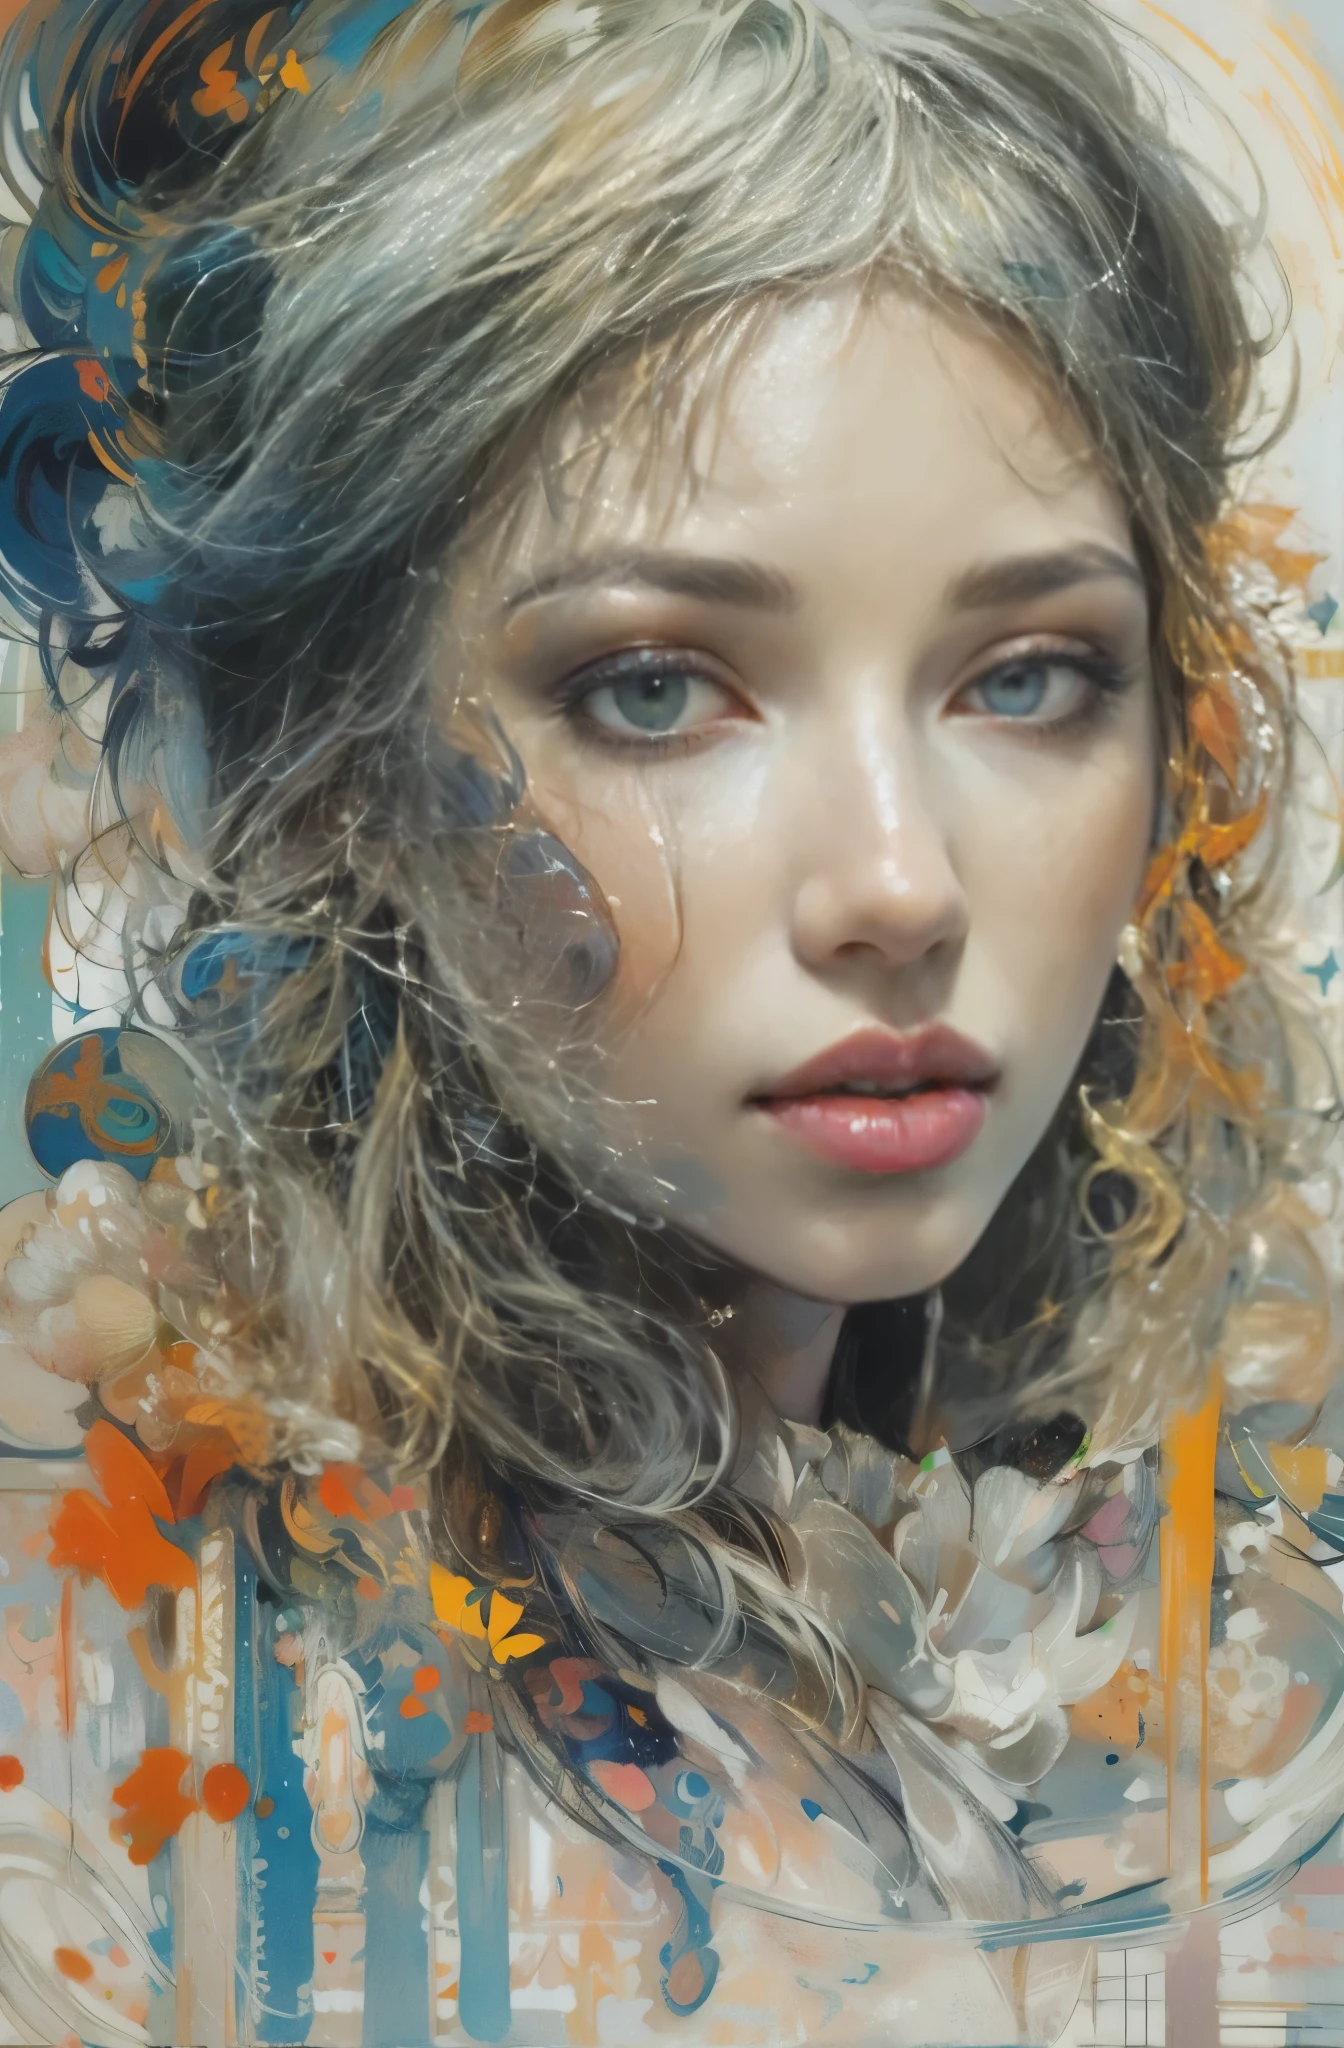 painting of woman, pretty much beautiful face, Ultra-detailed paintings inspired by WLOP, Trending with ArtStation, fantasy art, intricate WLOP, art of WLOP, WLOP art, WLOP |, the style of WLOP, beautiful character drawings, WLOP painting style, WLOP | art germ, Unparalleled Beauty Tumbler, figurative art, intense watercolor, watercolor detailed art, watercolor splash, surreal, avant-garde pop art, Beautiful and expressive paintings, Beautiful artwork illustration, very colorful tones, wonderful, cool beauty, master piece, highest quality, official art, women only, sharp outline, best shot, vector art, Written by Sandra Chevrier, dave mckean、By Richard Avedon、Written by Makiezi Kusiala, luminous design